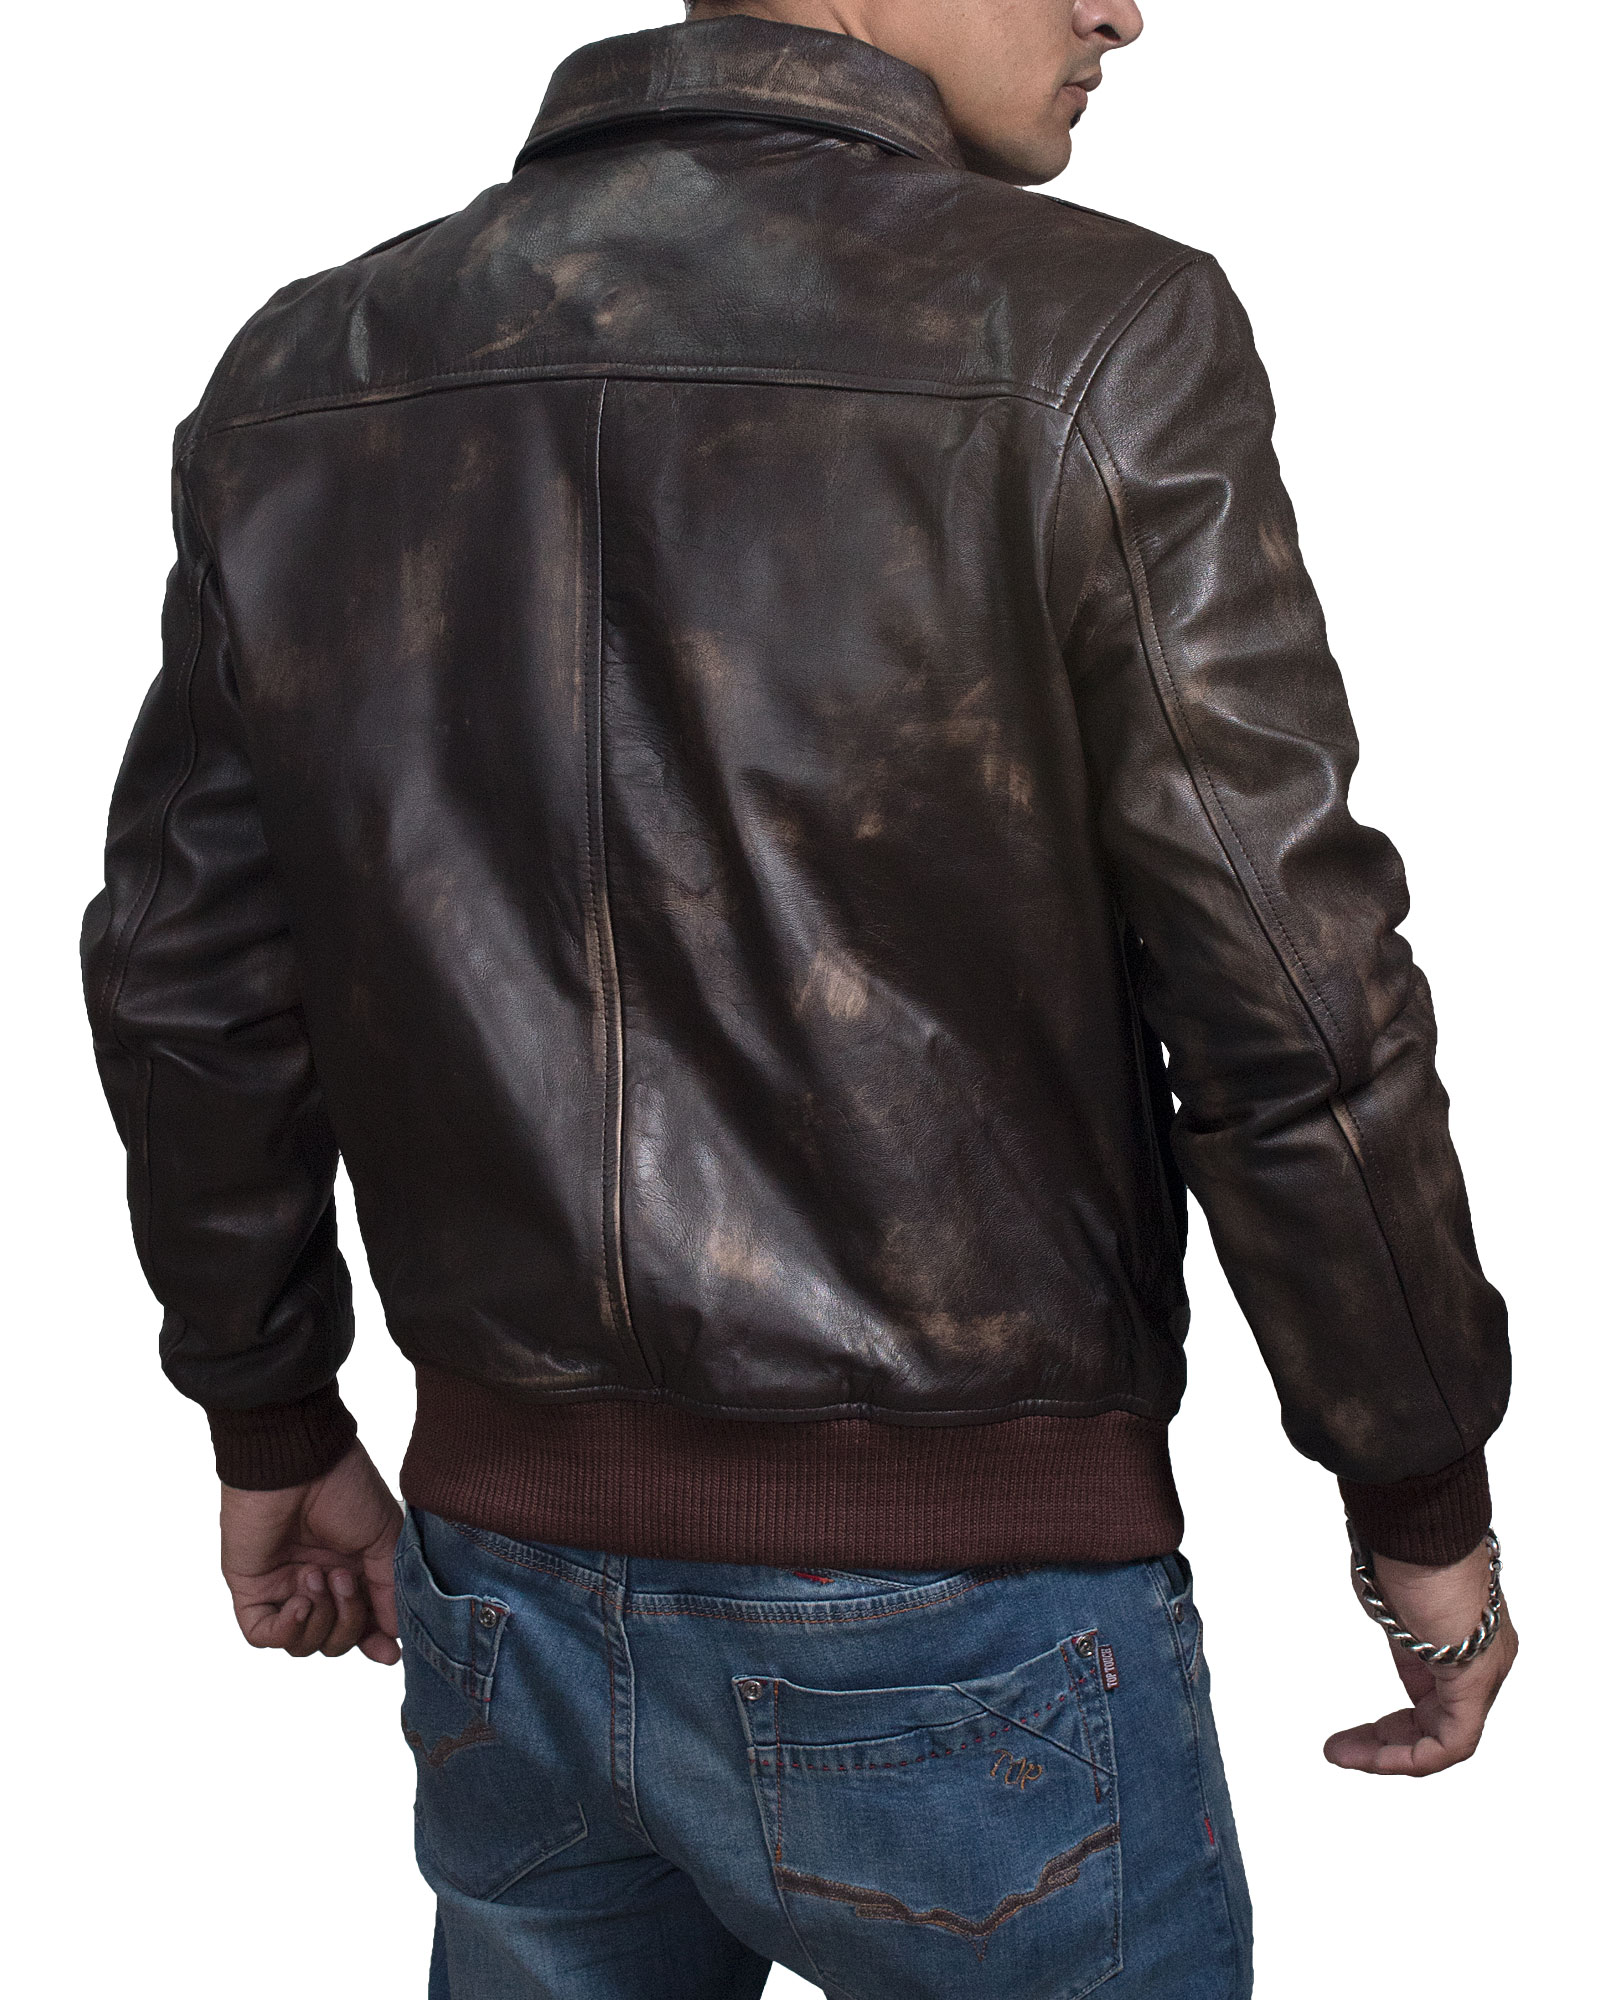 Mens A2 Flight Distressed Brown Leather Bomber Jacket | XtremeJackets